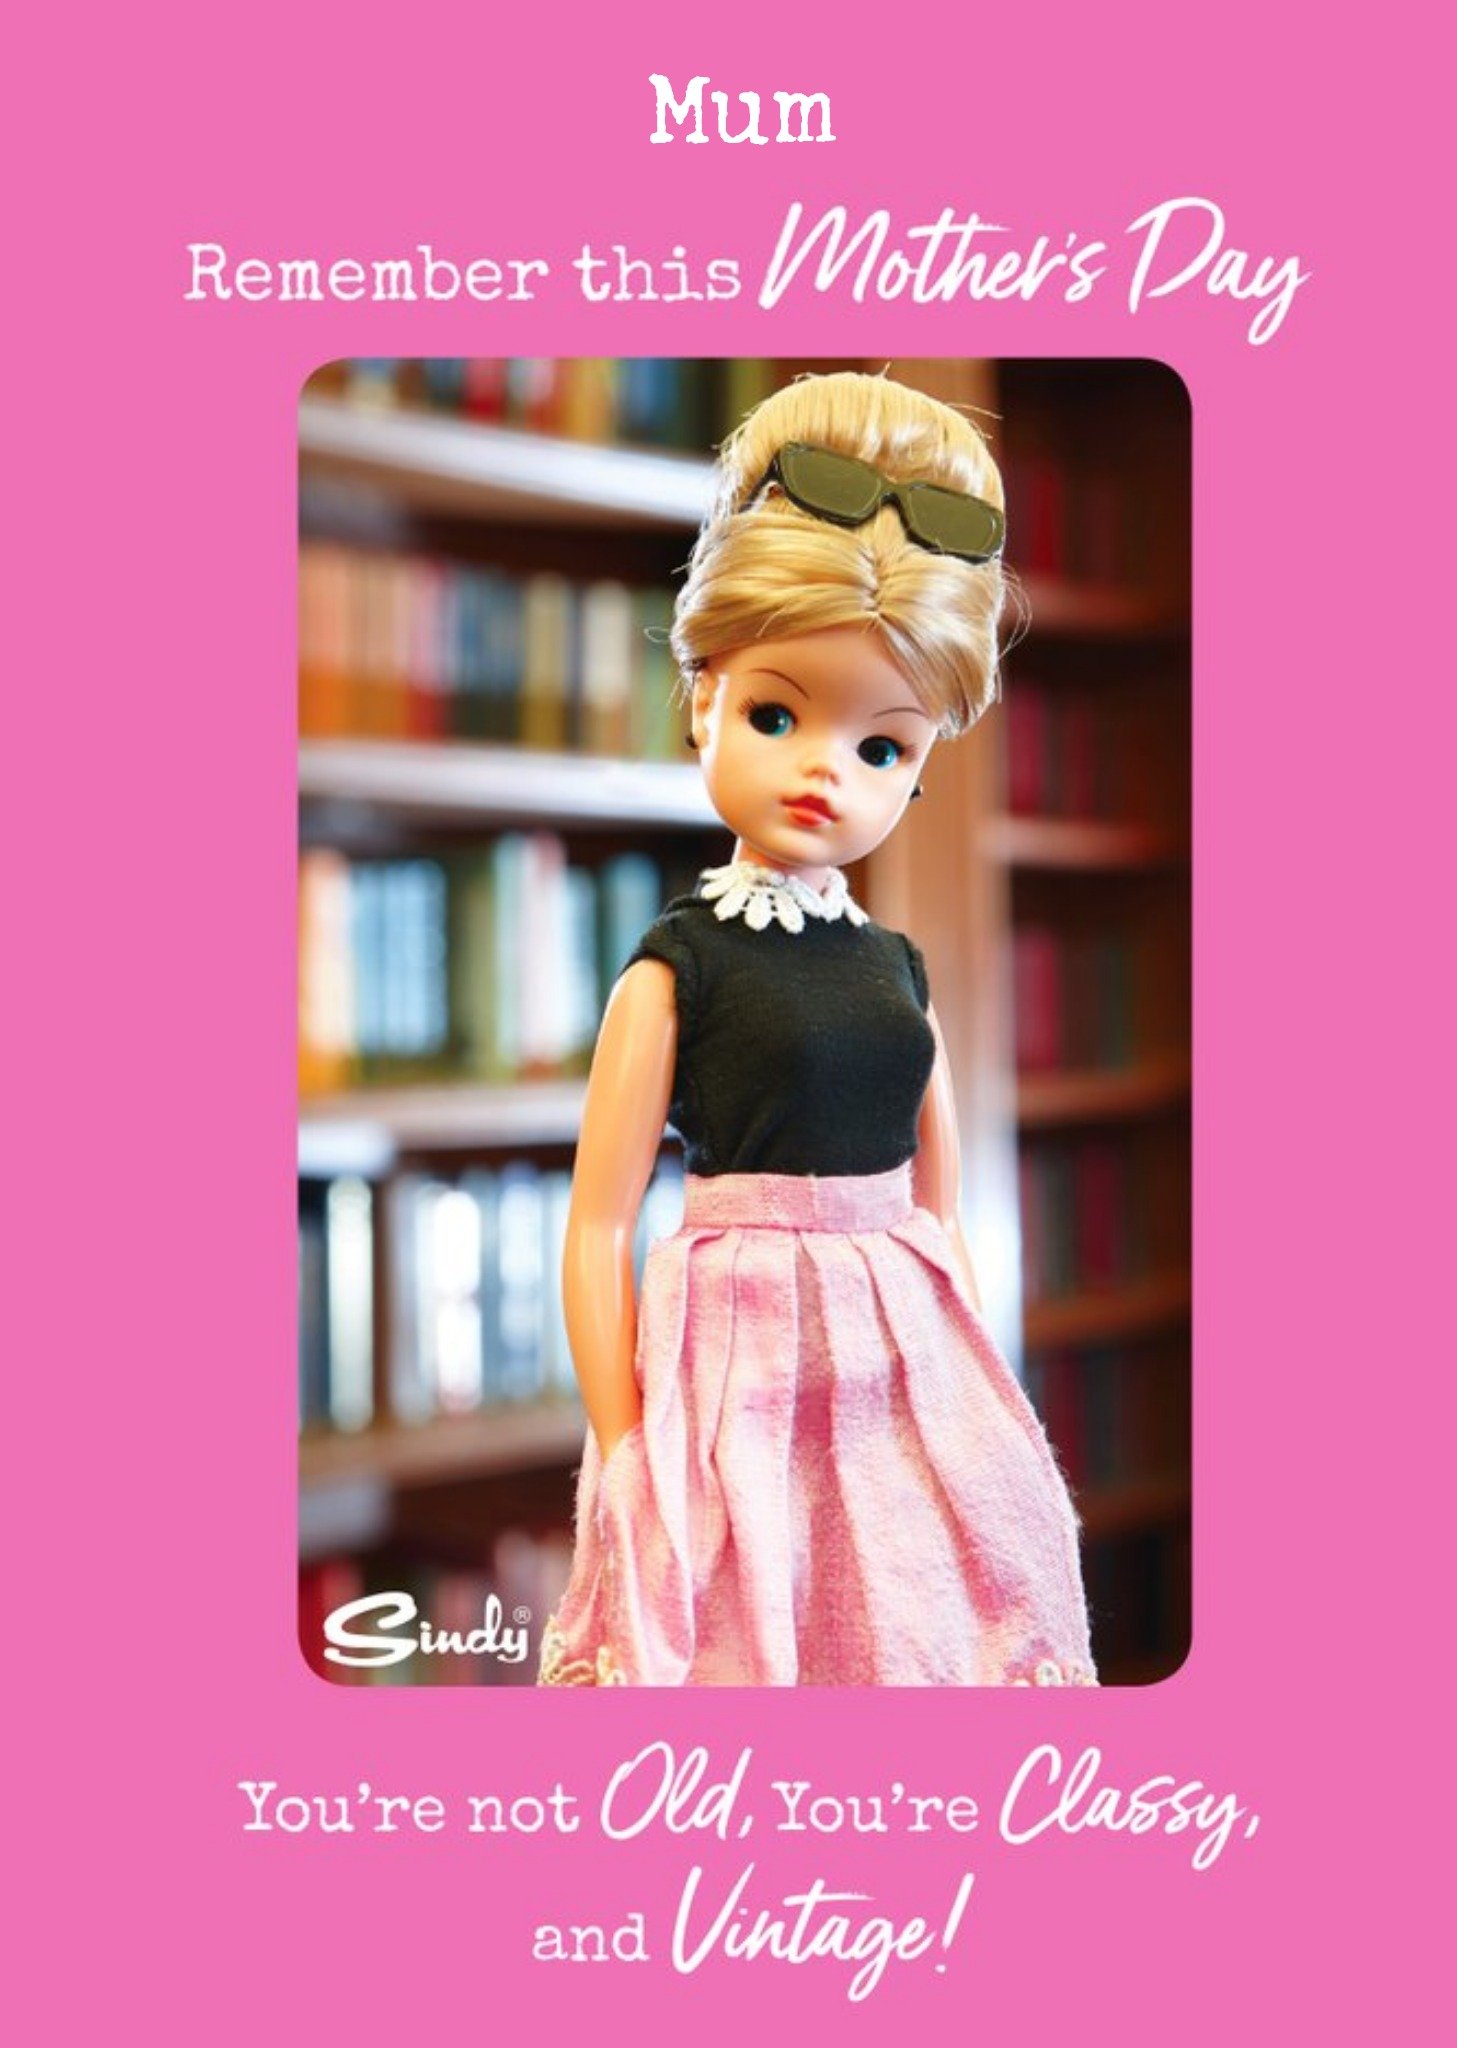 Moonpig Danilo Sindy You're Not Old You're Classy And Vintage Mum Mother's Day Card Ecard